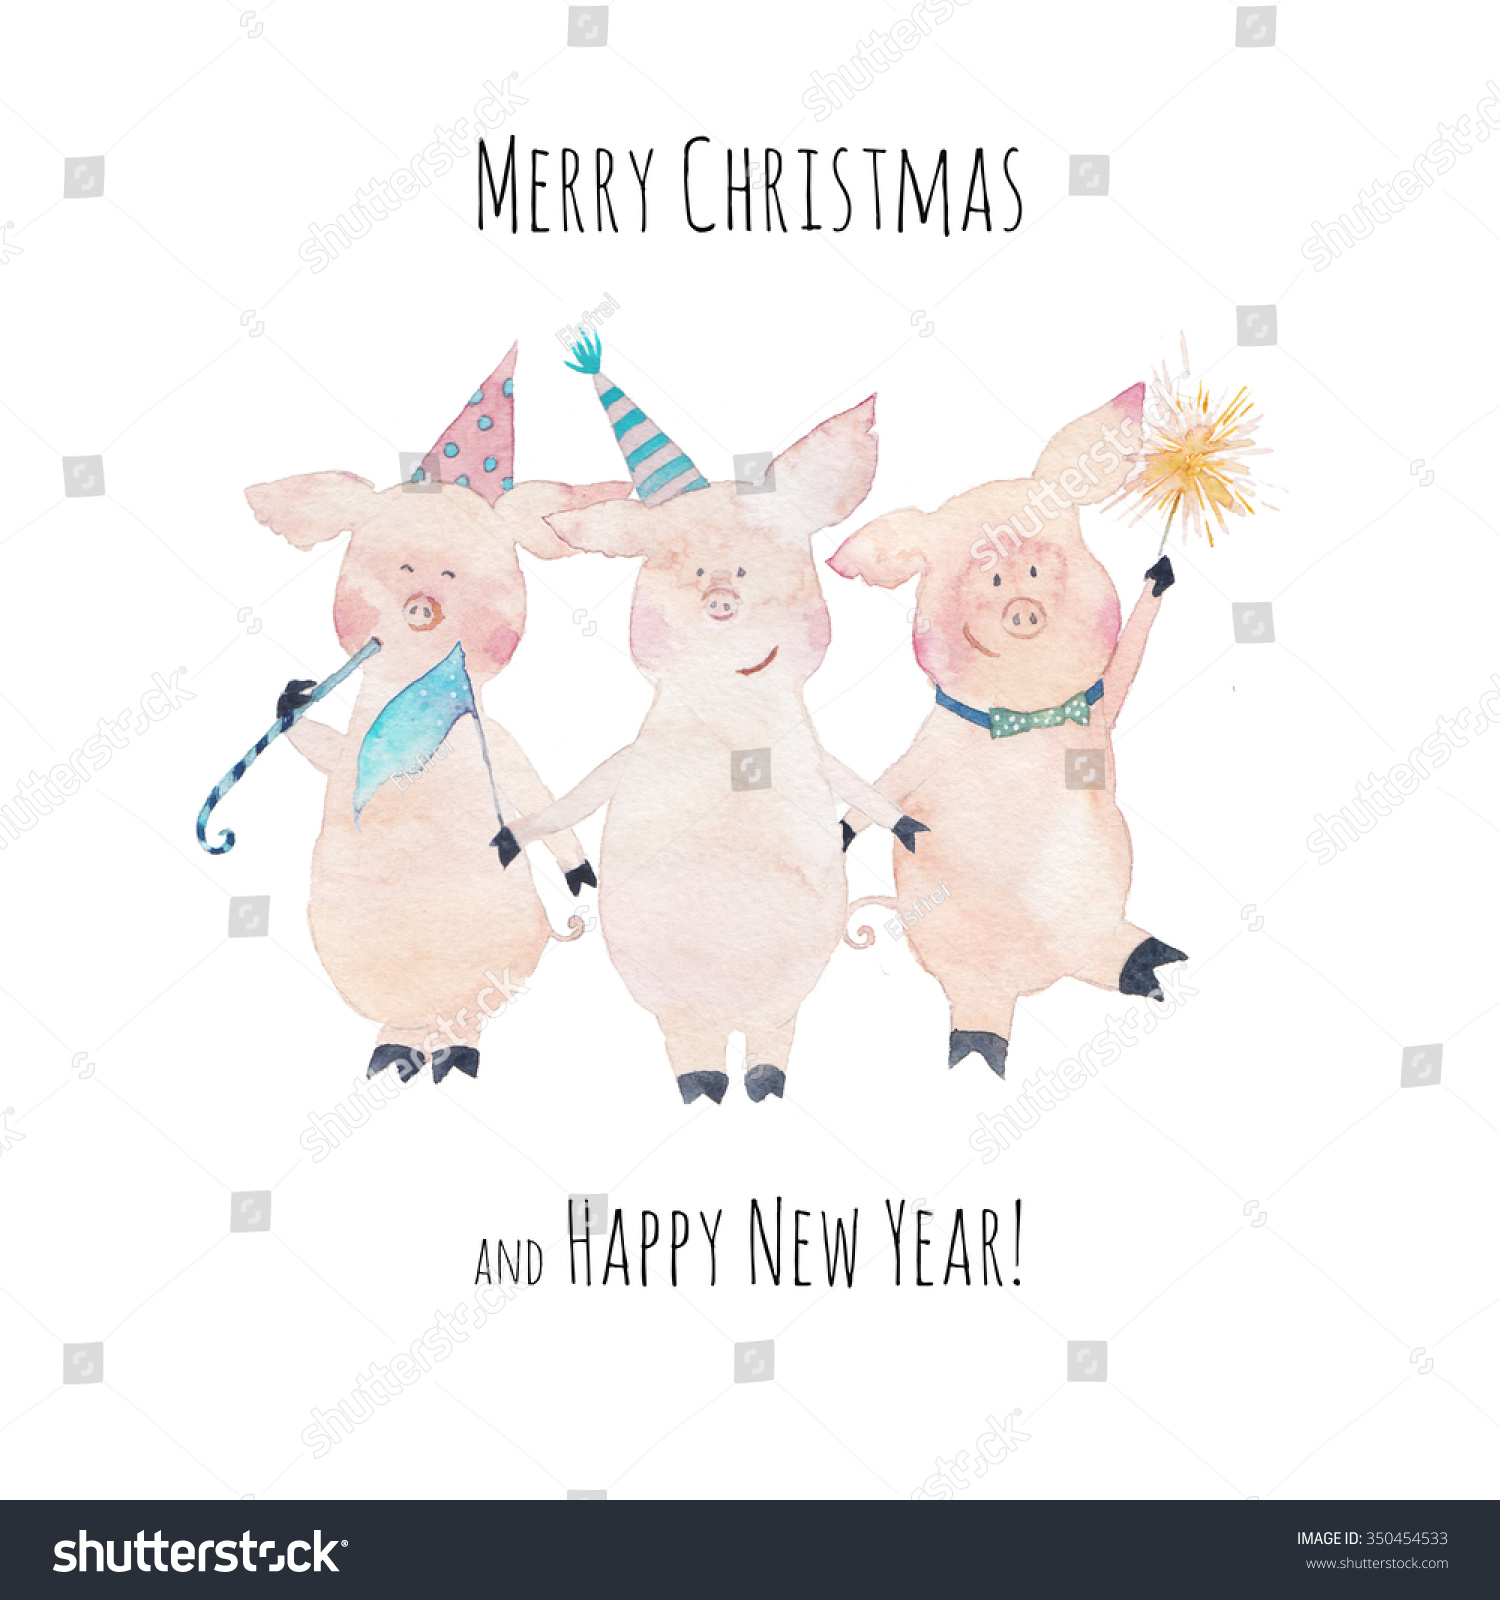 Merry Christmas Happy New Year Card Stock Illustration 350454533 - Shutterstock